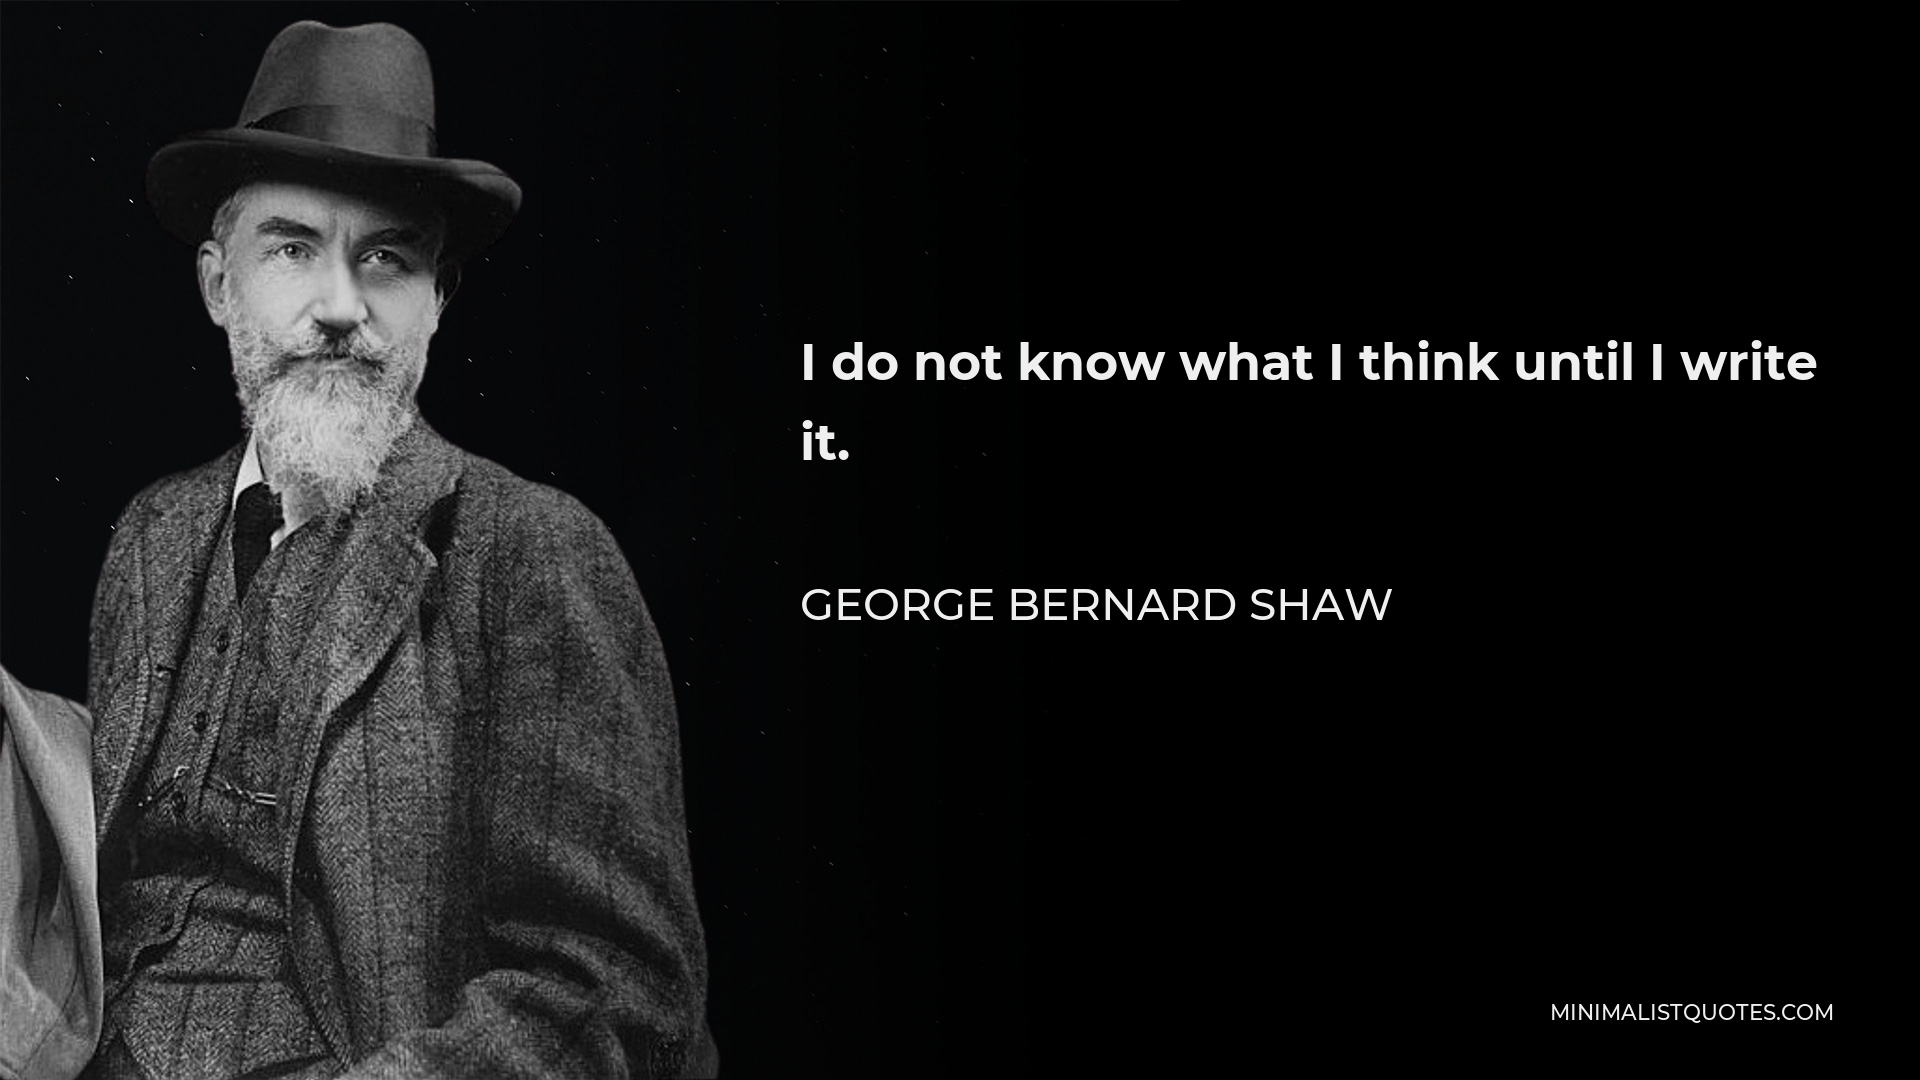 George Bernard Shaw Quote - I do not know what I think until I write it.